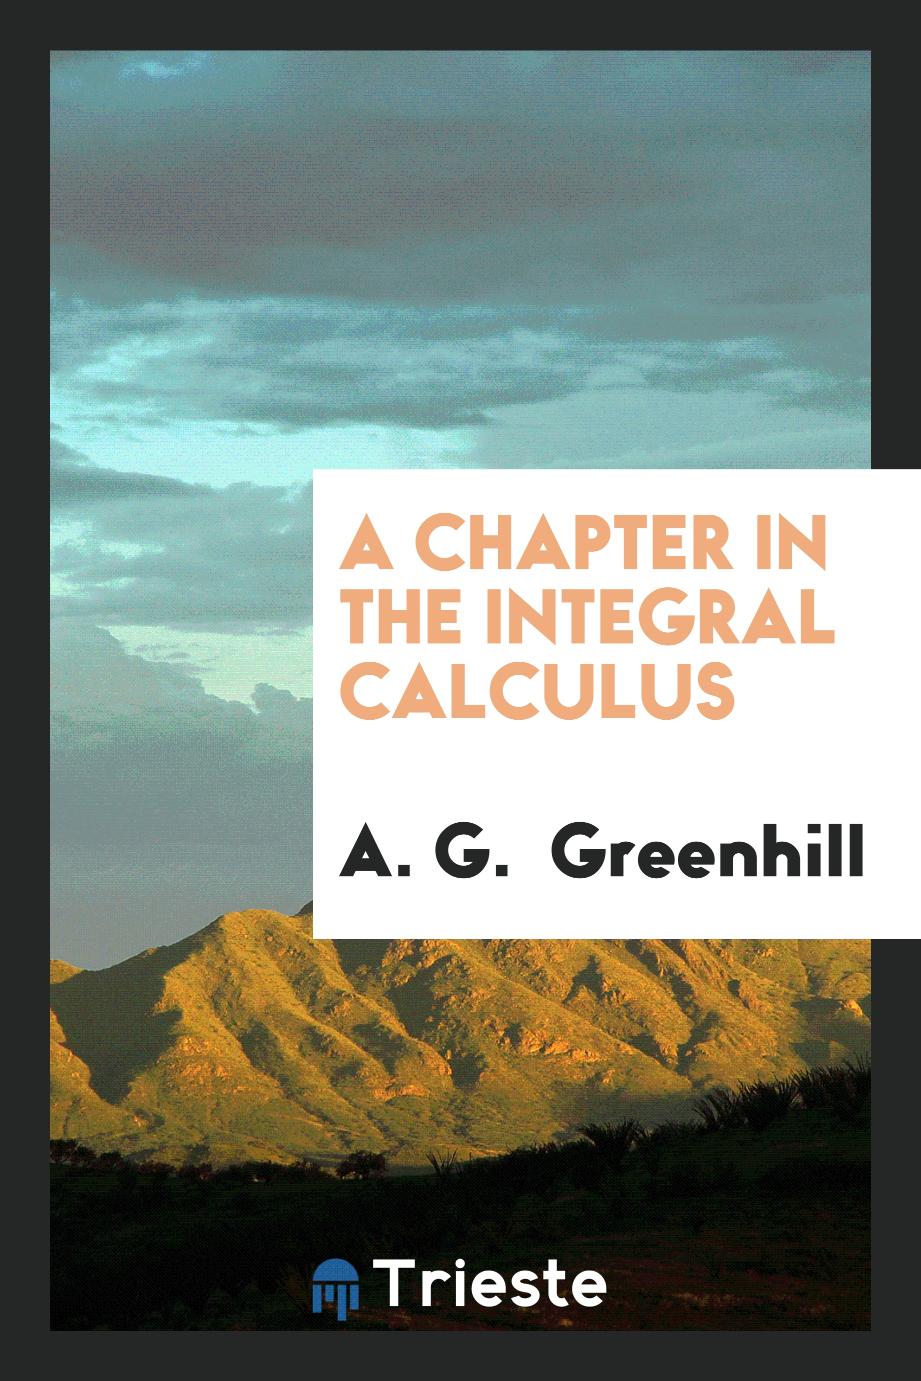 A Chapter in the Integral Calculus